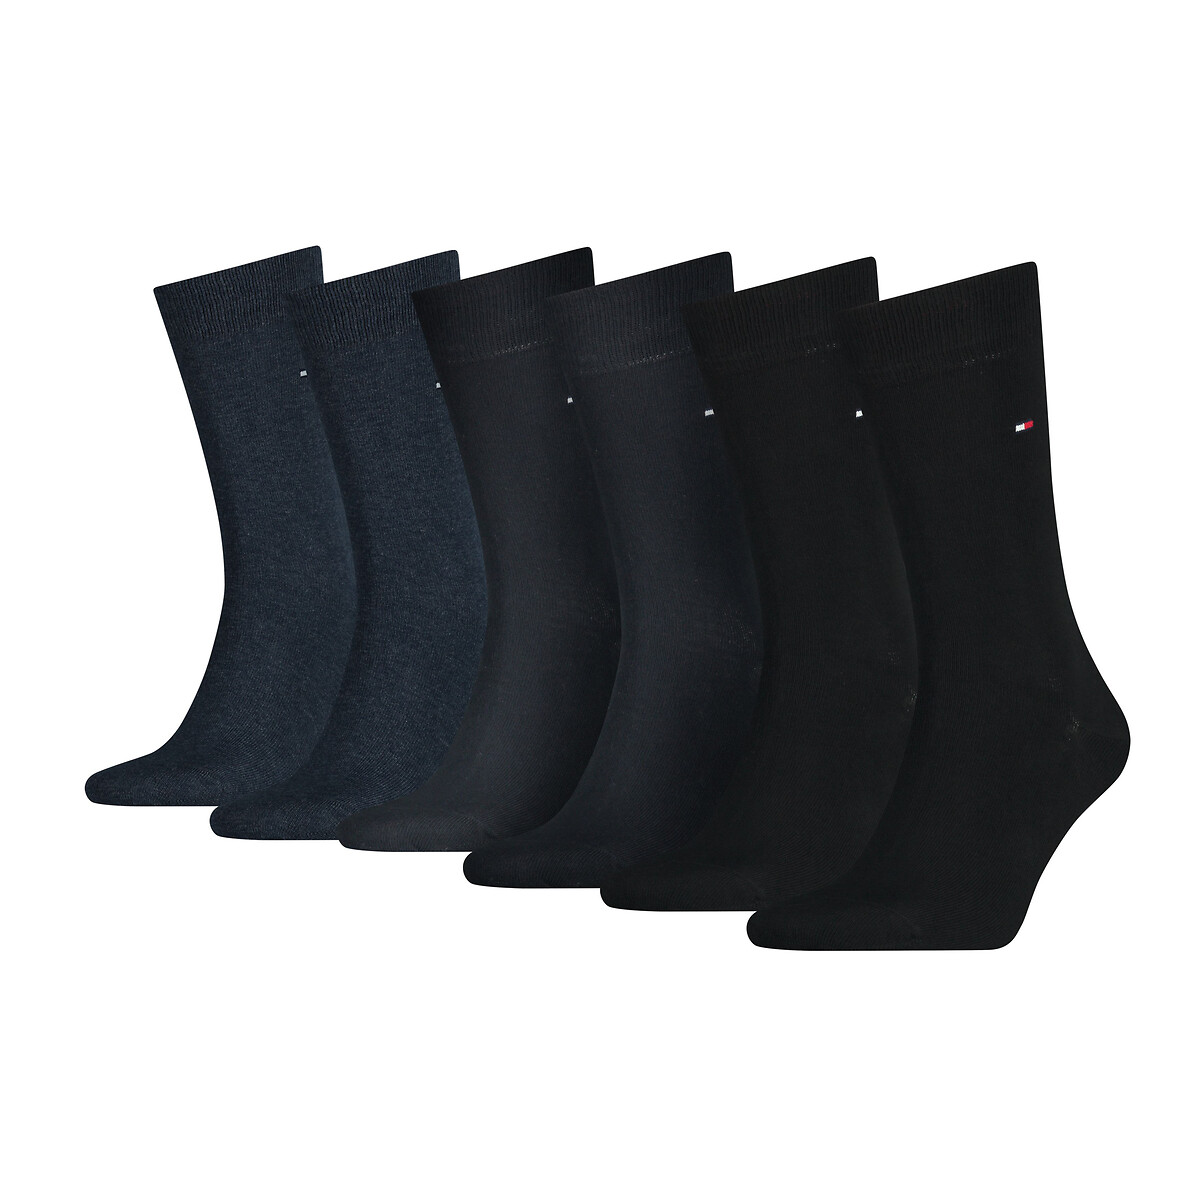 Pack of 6 Pairs of Crew Socks in Cotton Mix